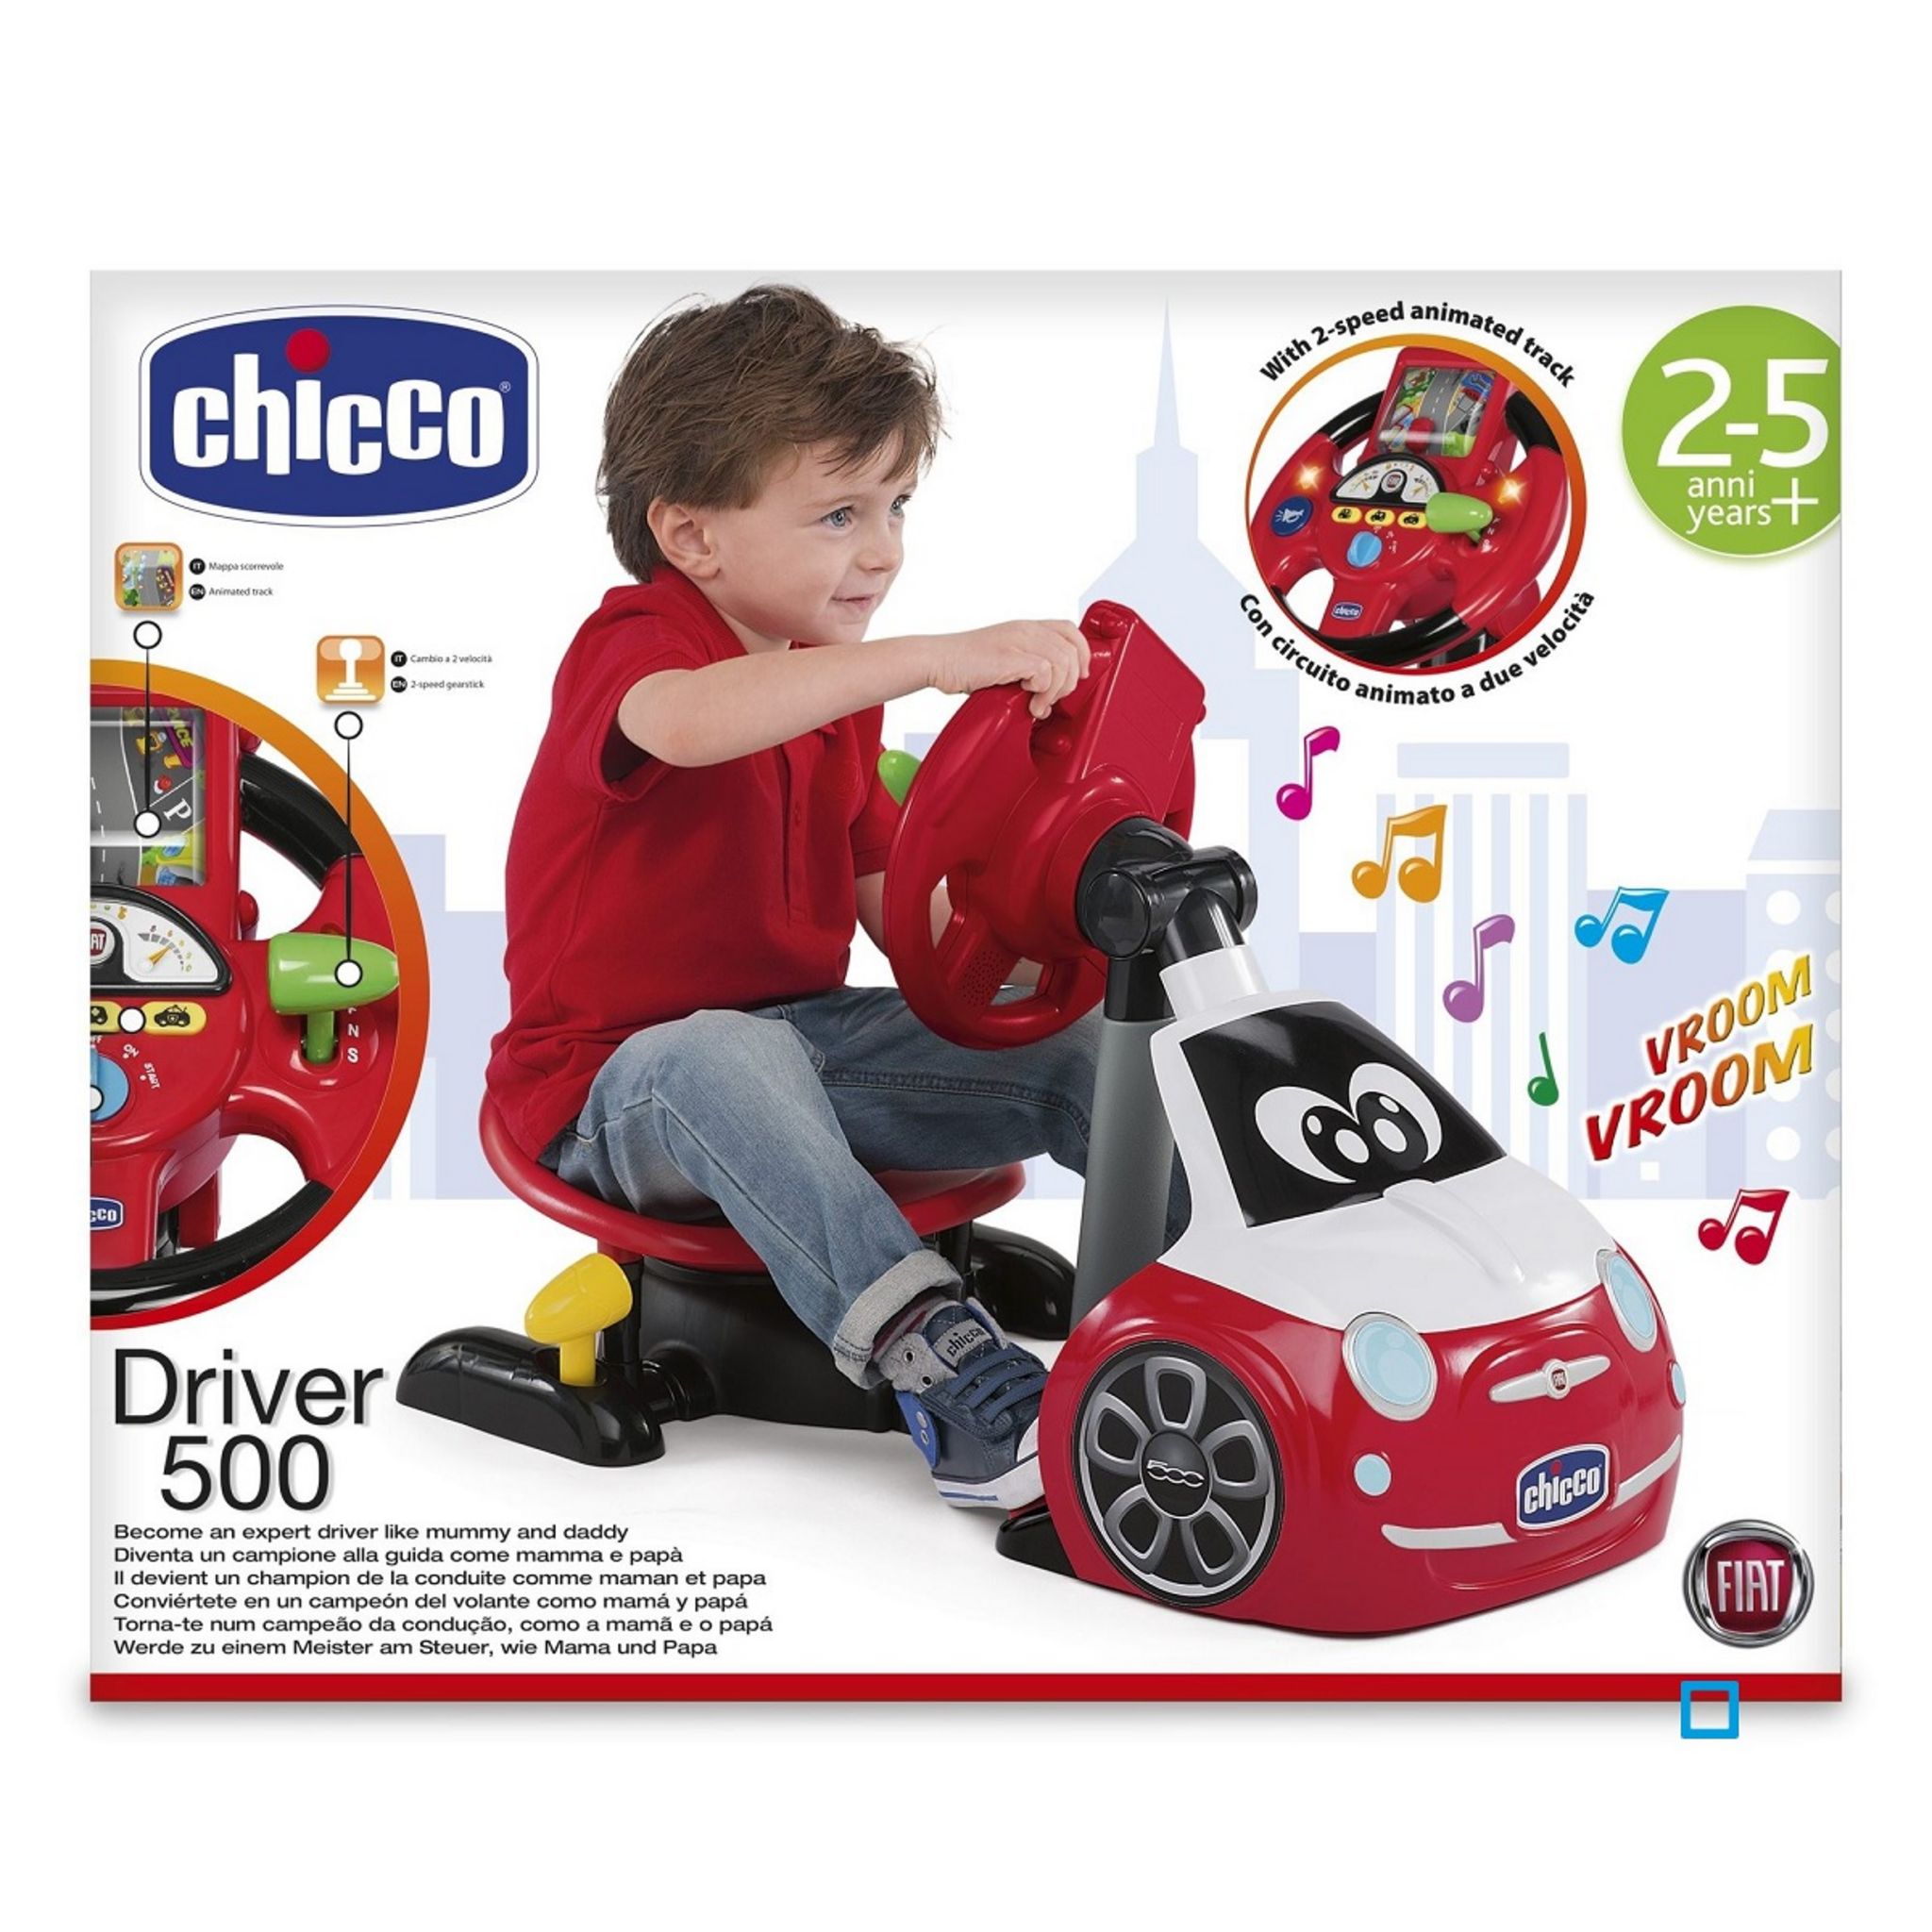 CHICCO Fiat 500 Driver pas cher 